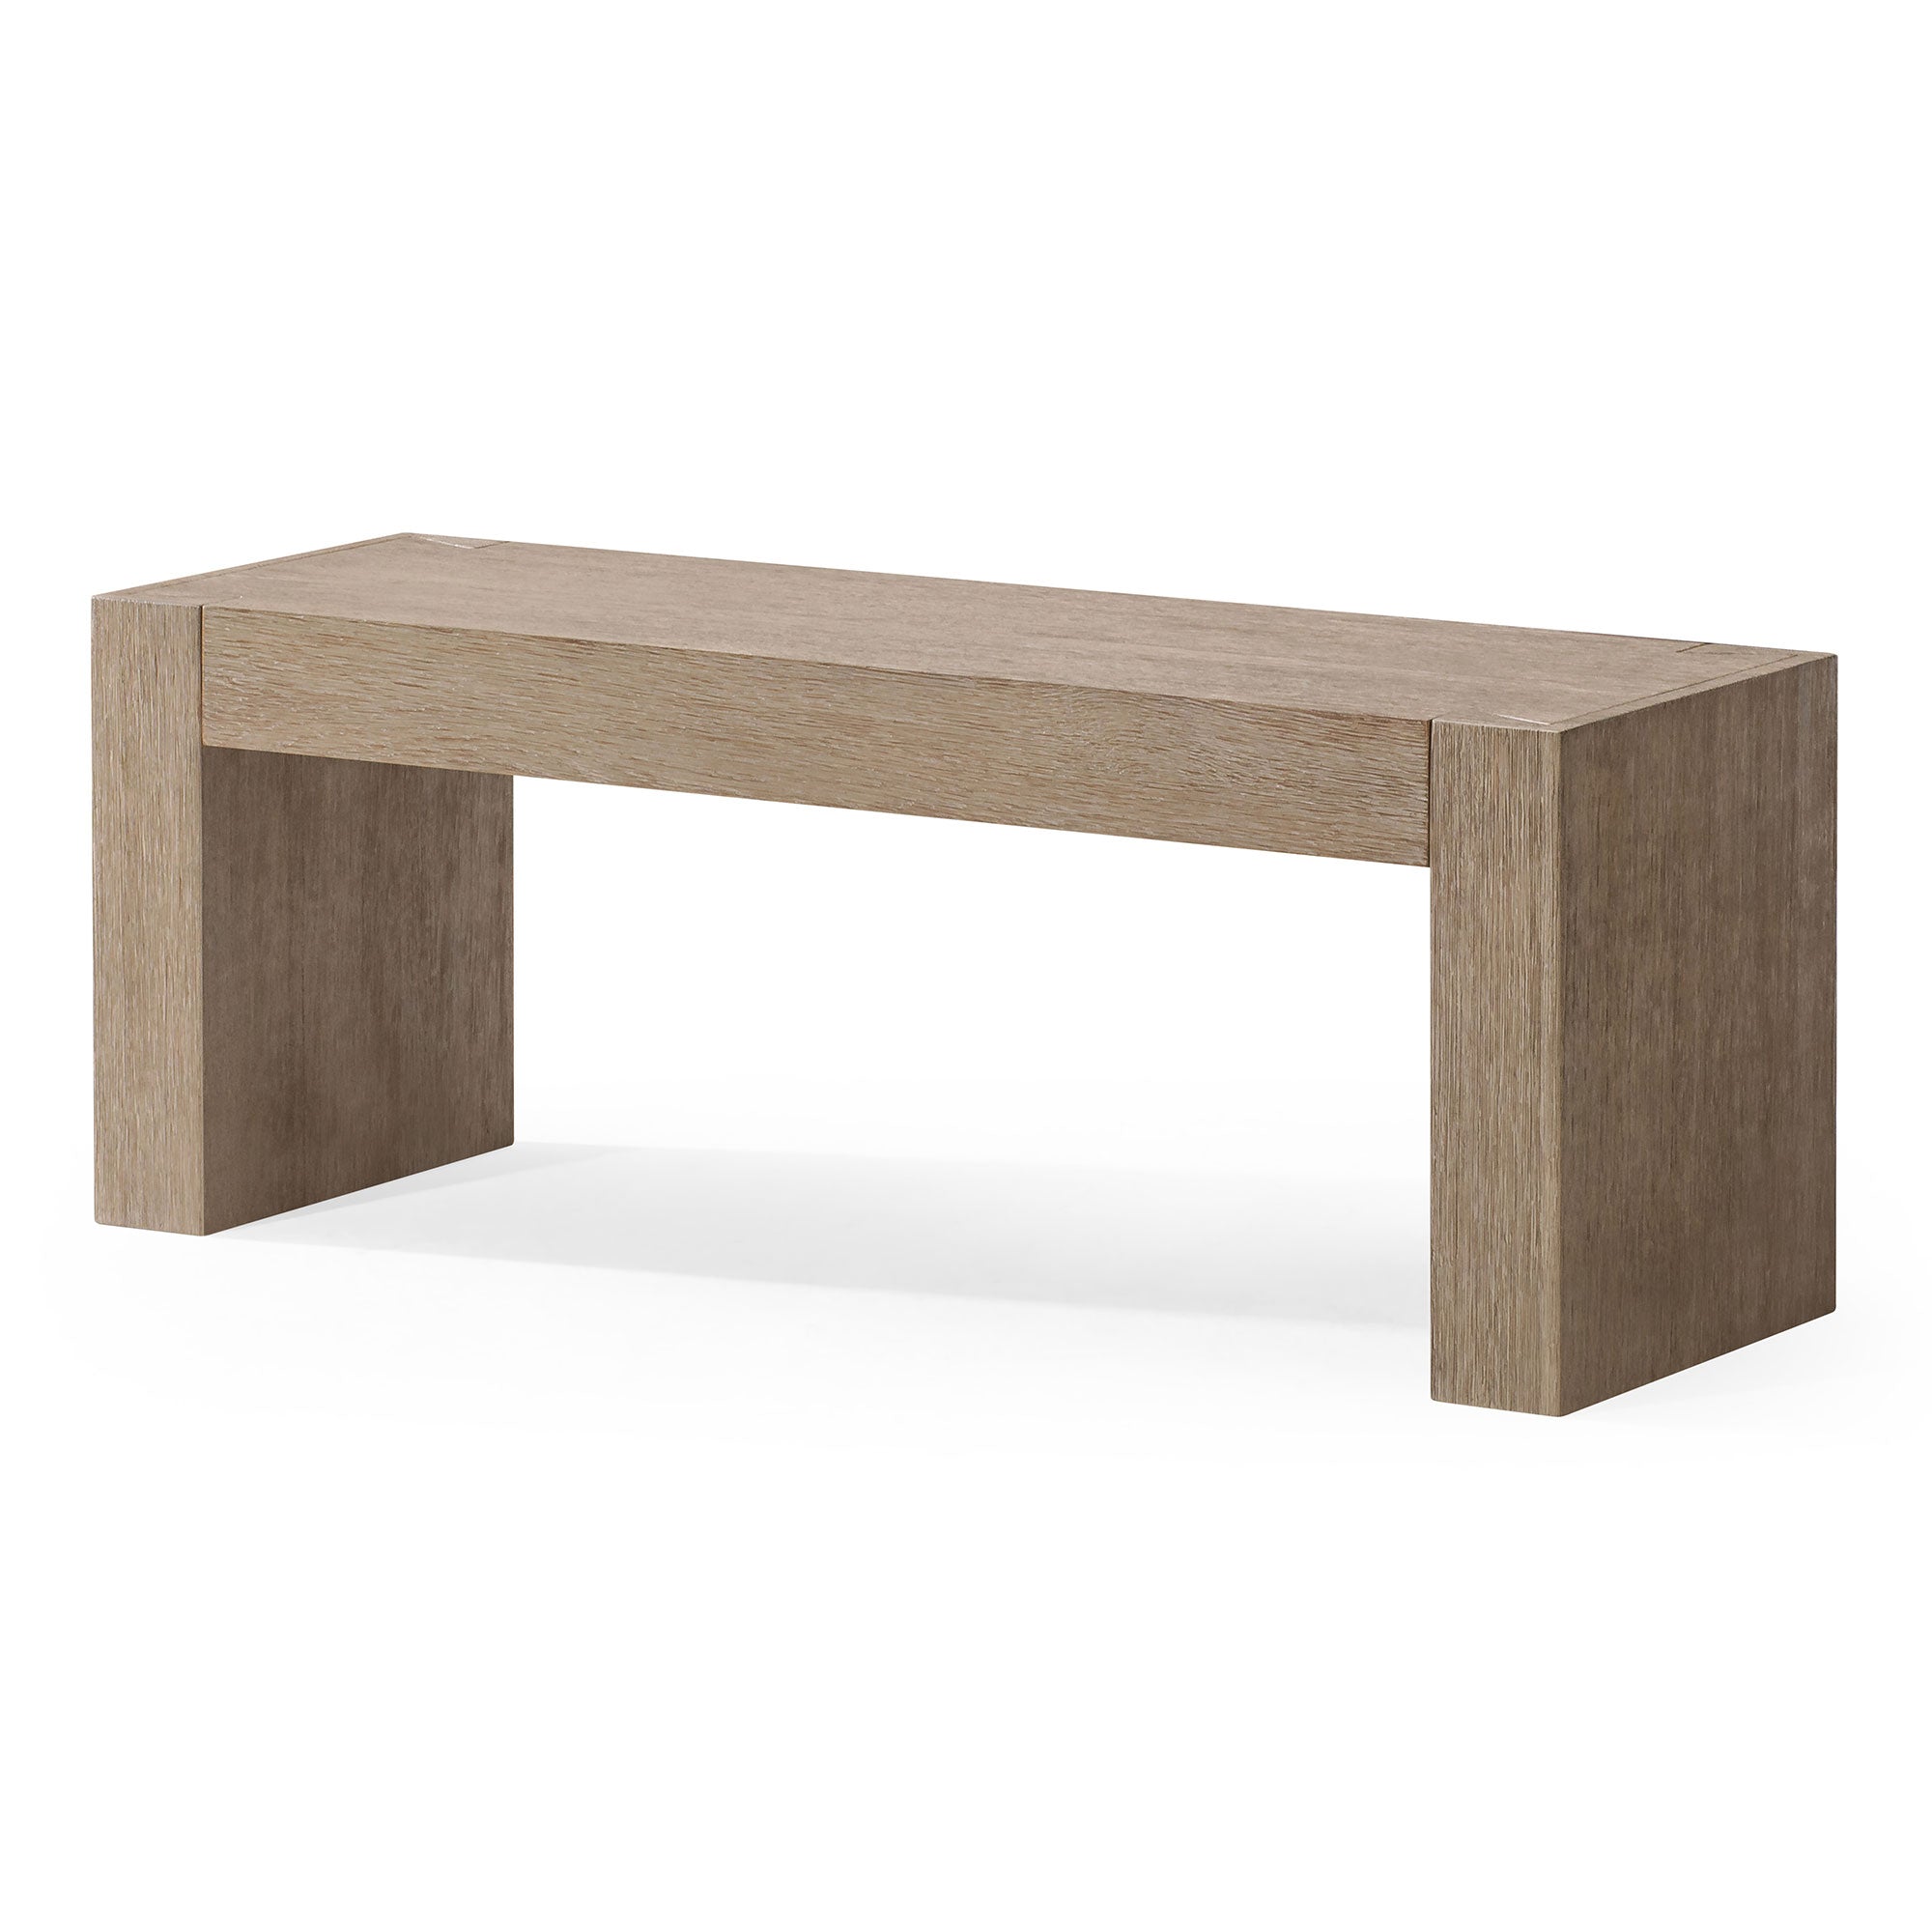 Zeno Organic Wooden Bench in Weathered Grey Finish in Ottomans & Benches by Maven Lane